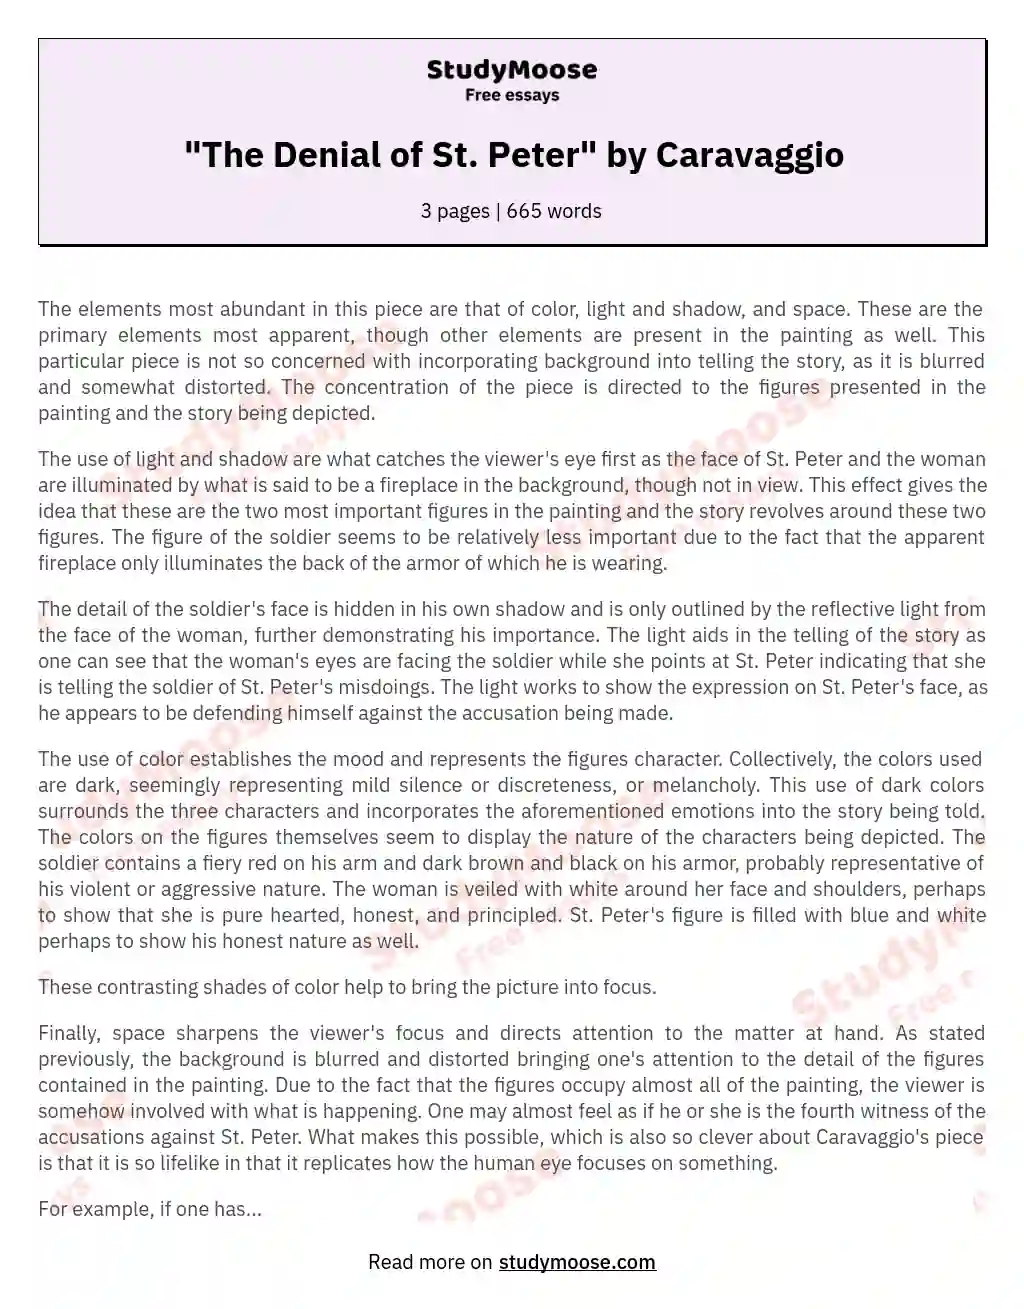 "The Denial of St. Peter" by Caravaggio essay